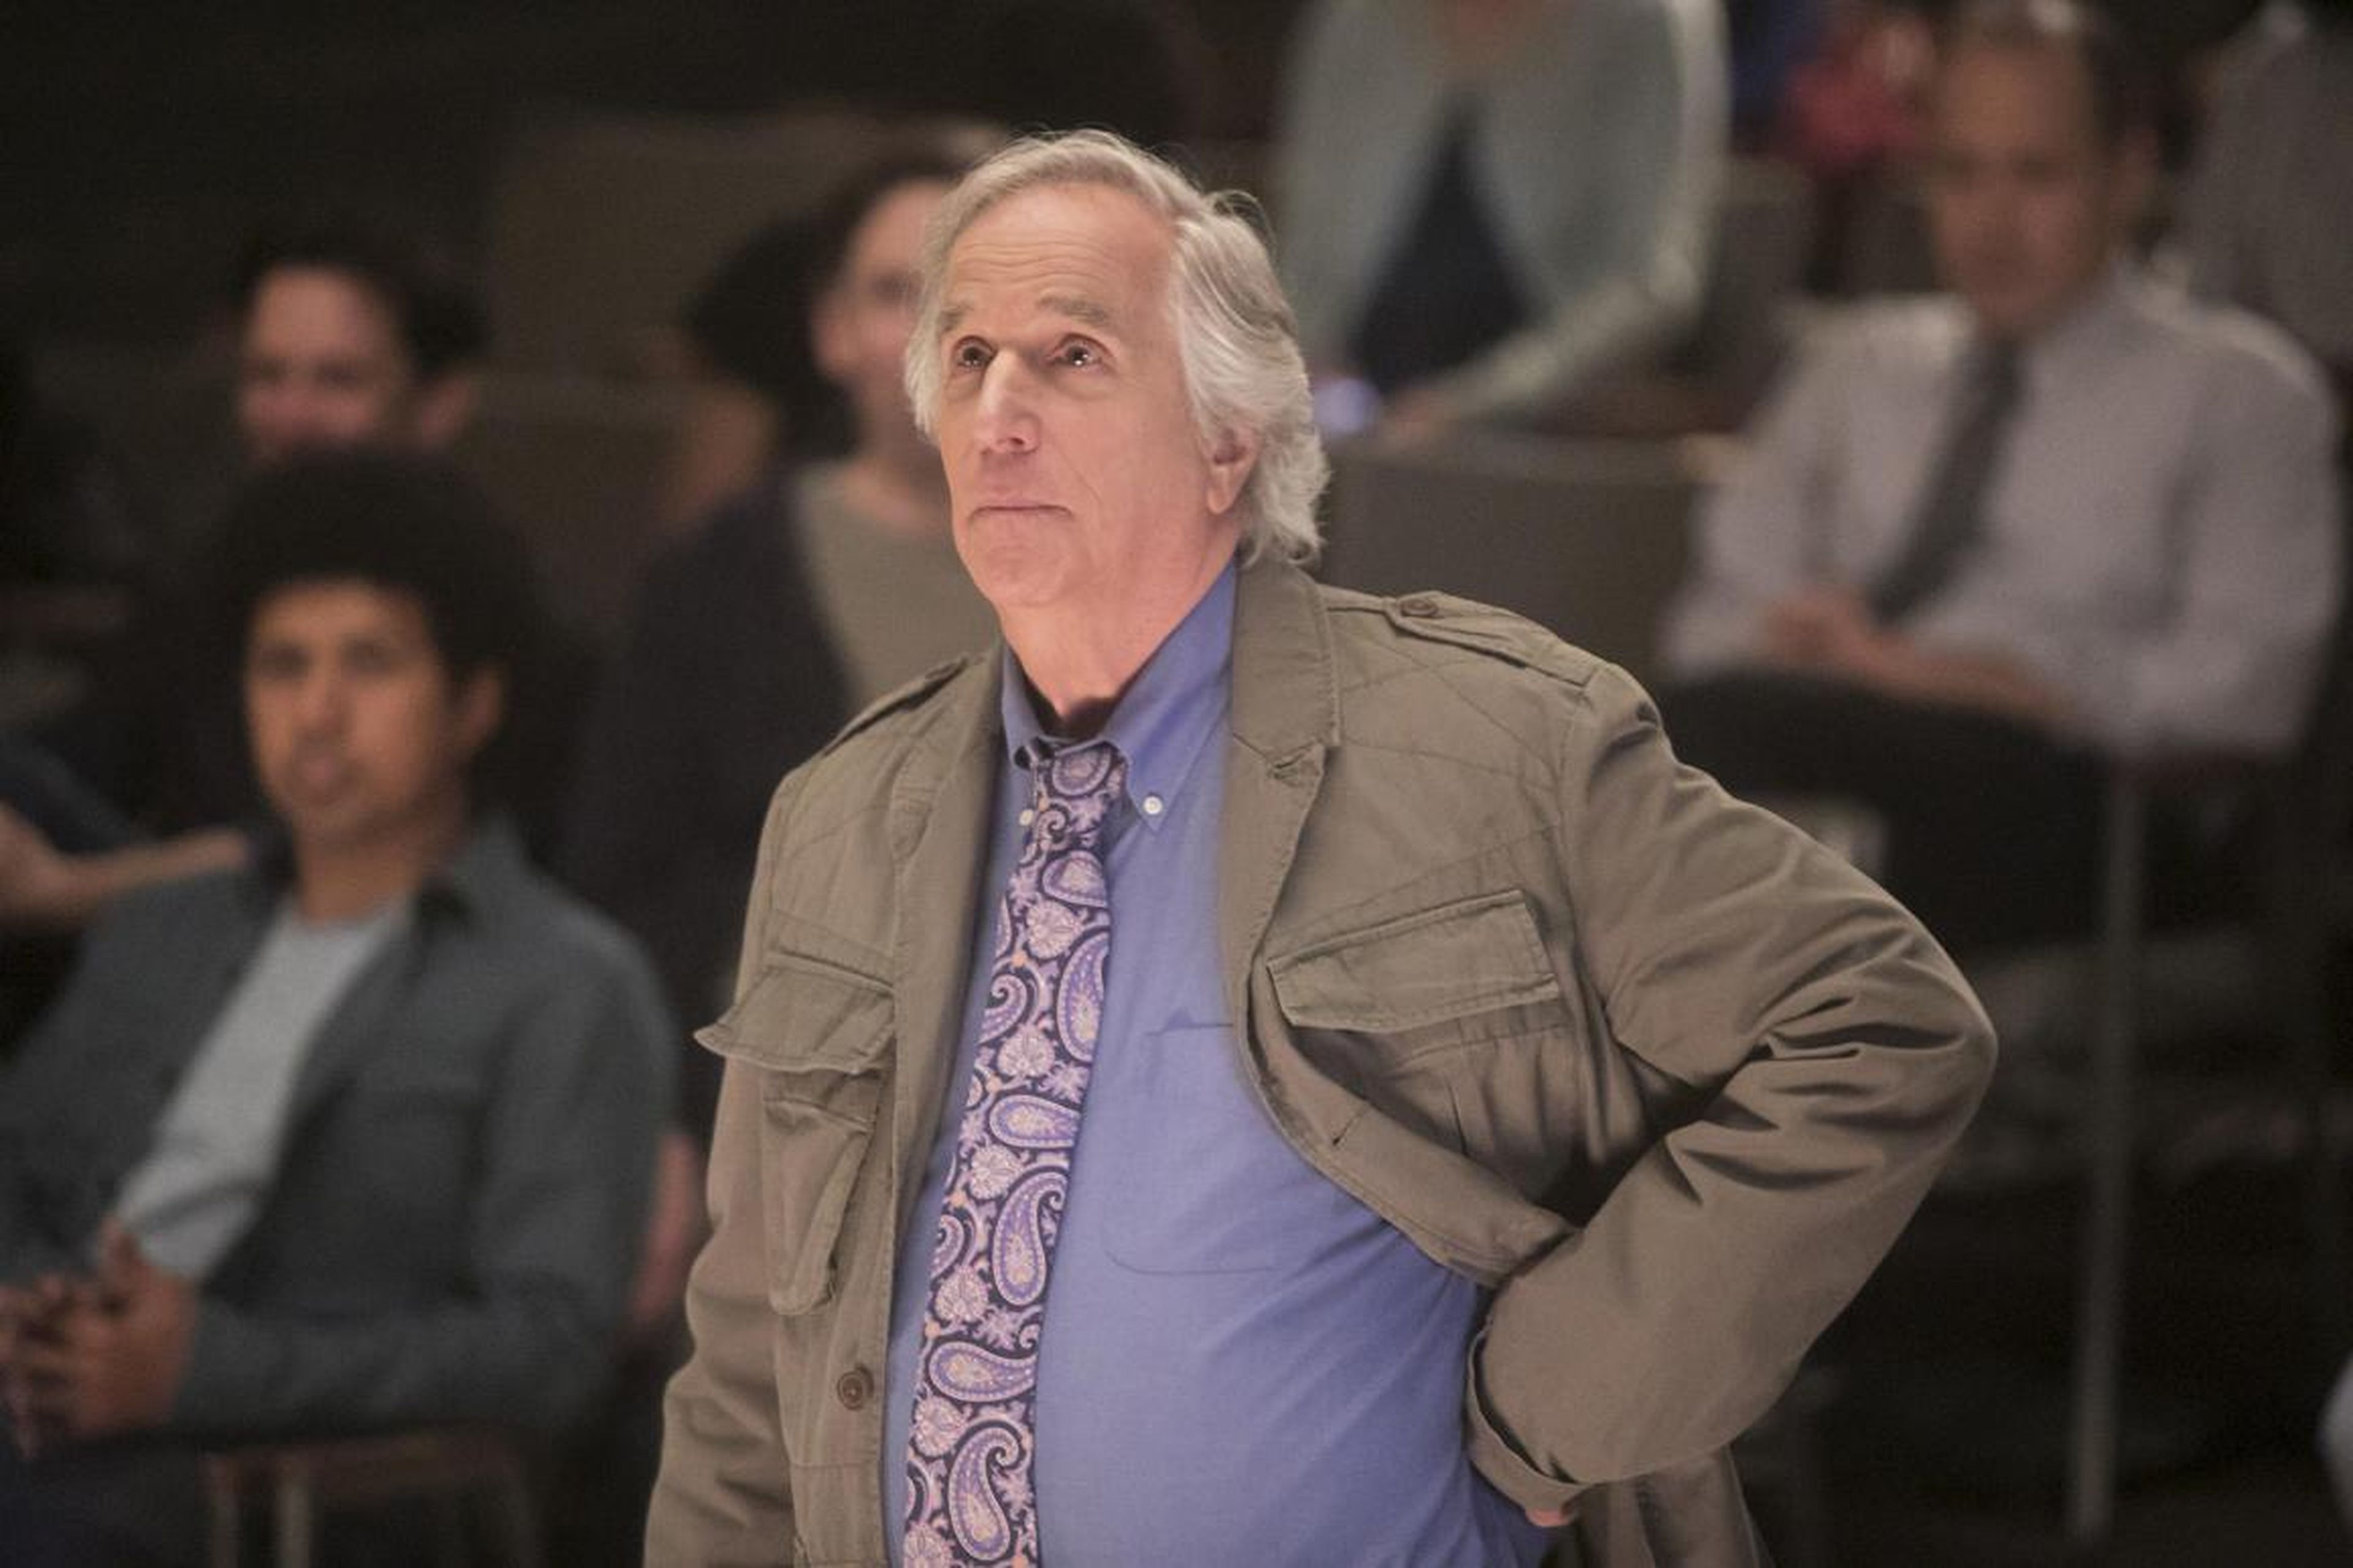 Winkler plays an acting teacher on the HBO comedy.